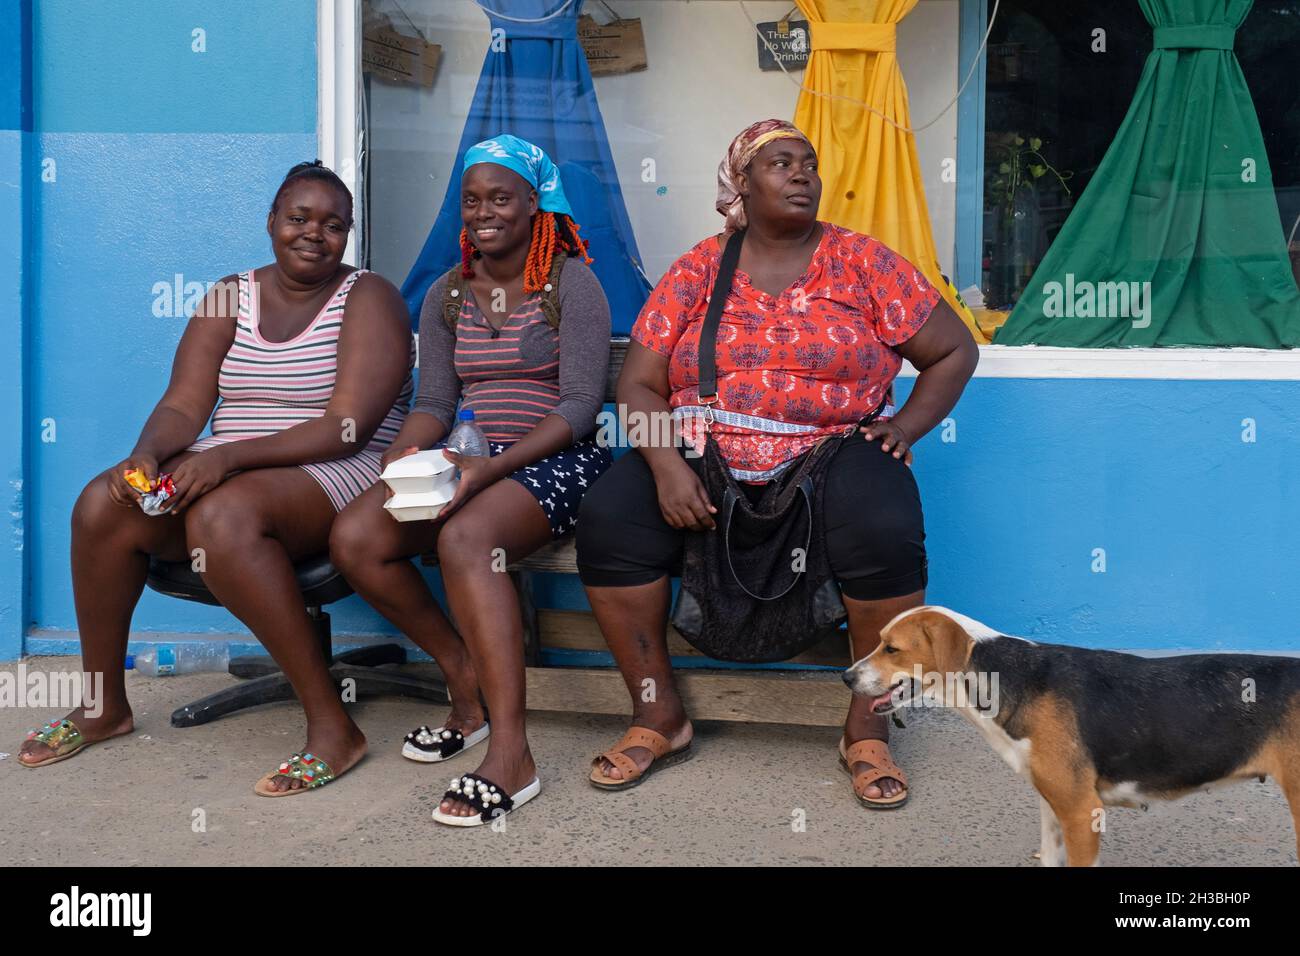 Local black women posing in the town Clifton on Union Island, part of the nation of Saint Vincent and the Grenadines in the Caribbean Sea Stock Photo